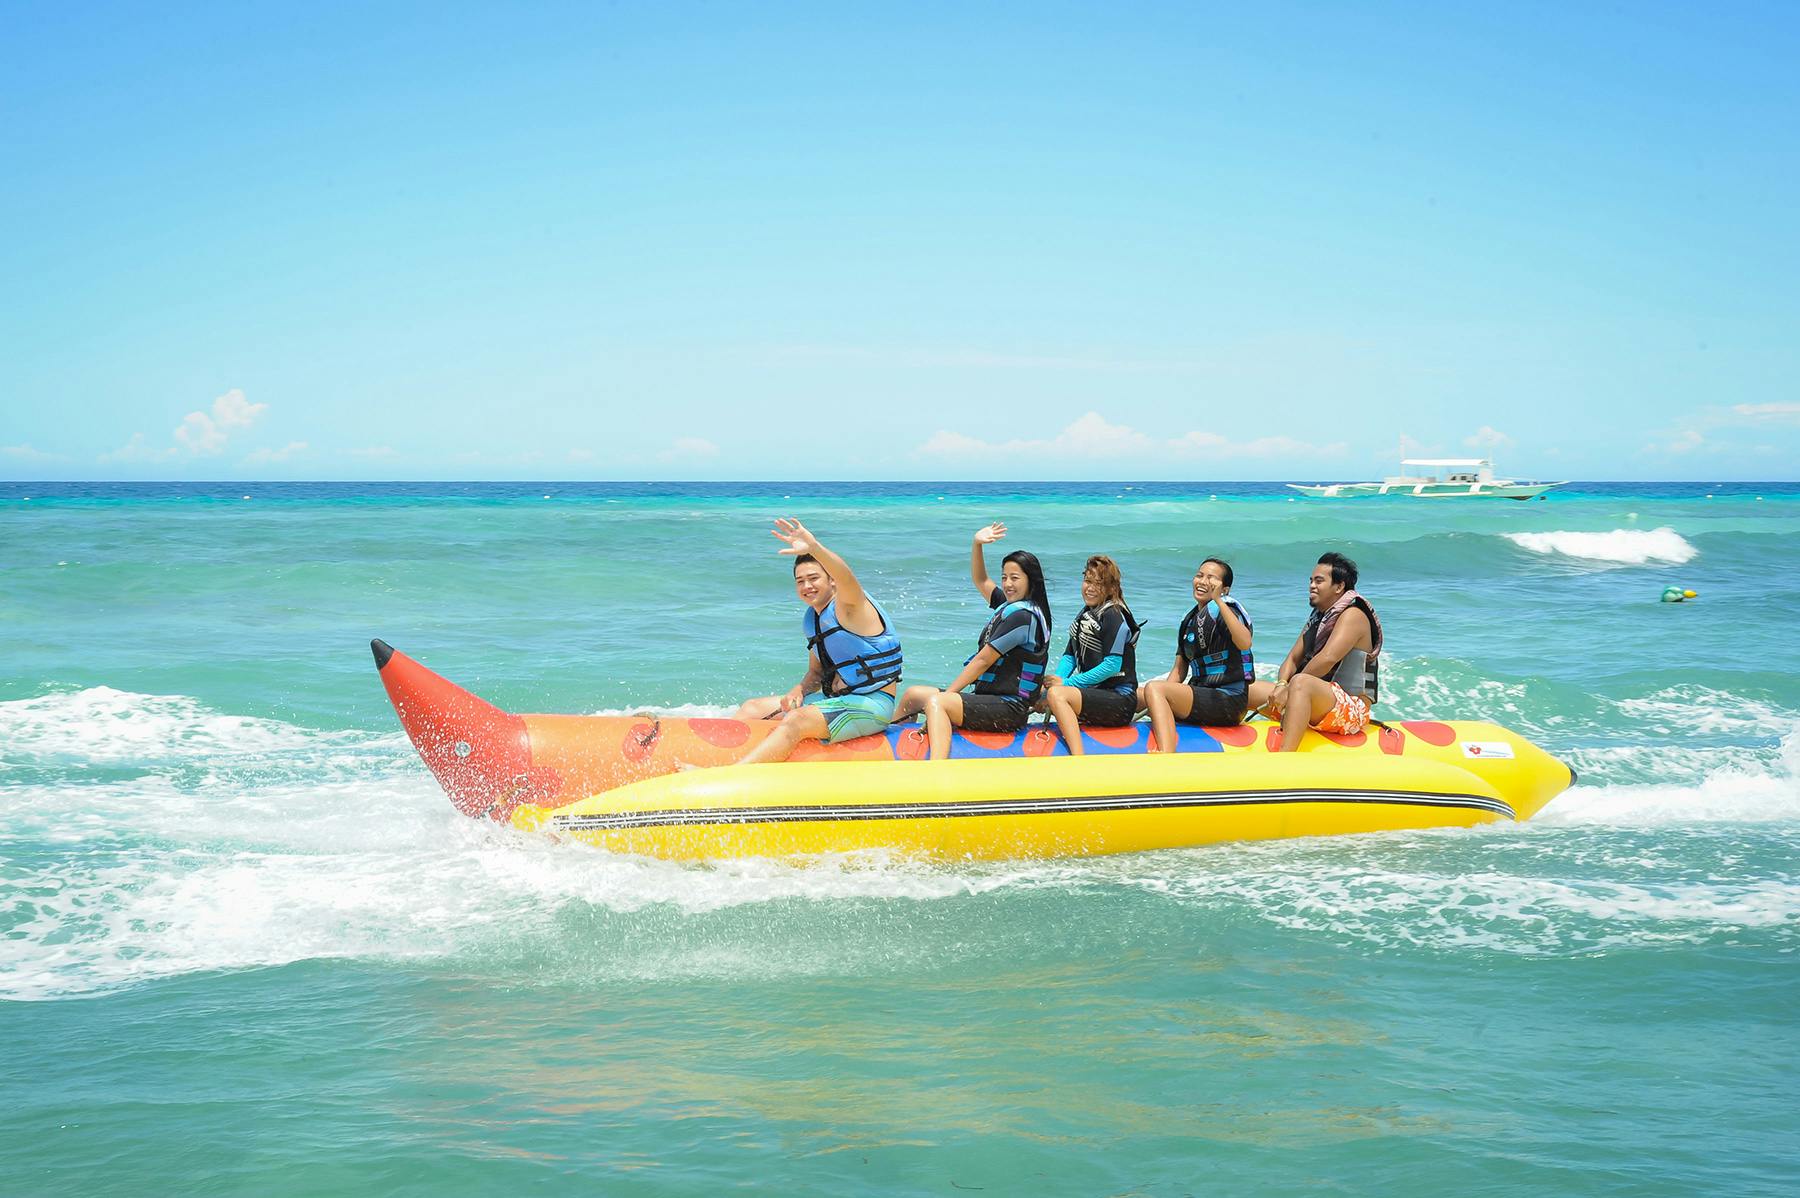 Tourists during the banana boat experience in Panglao Bohol